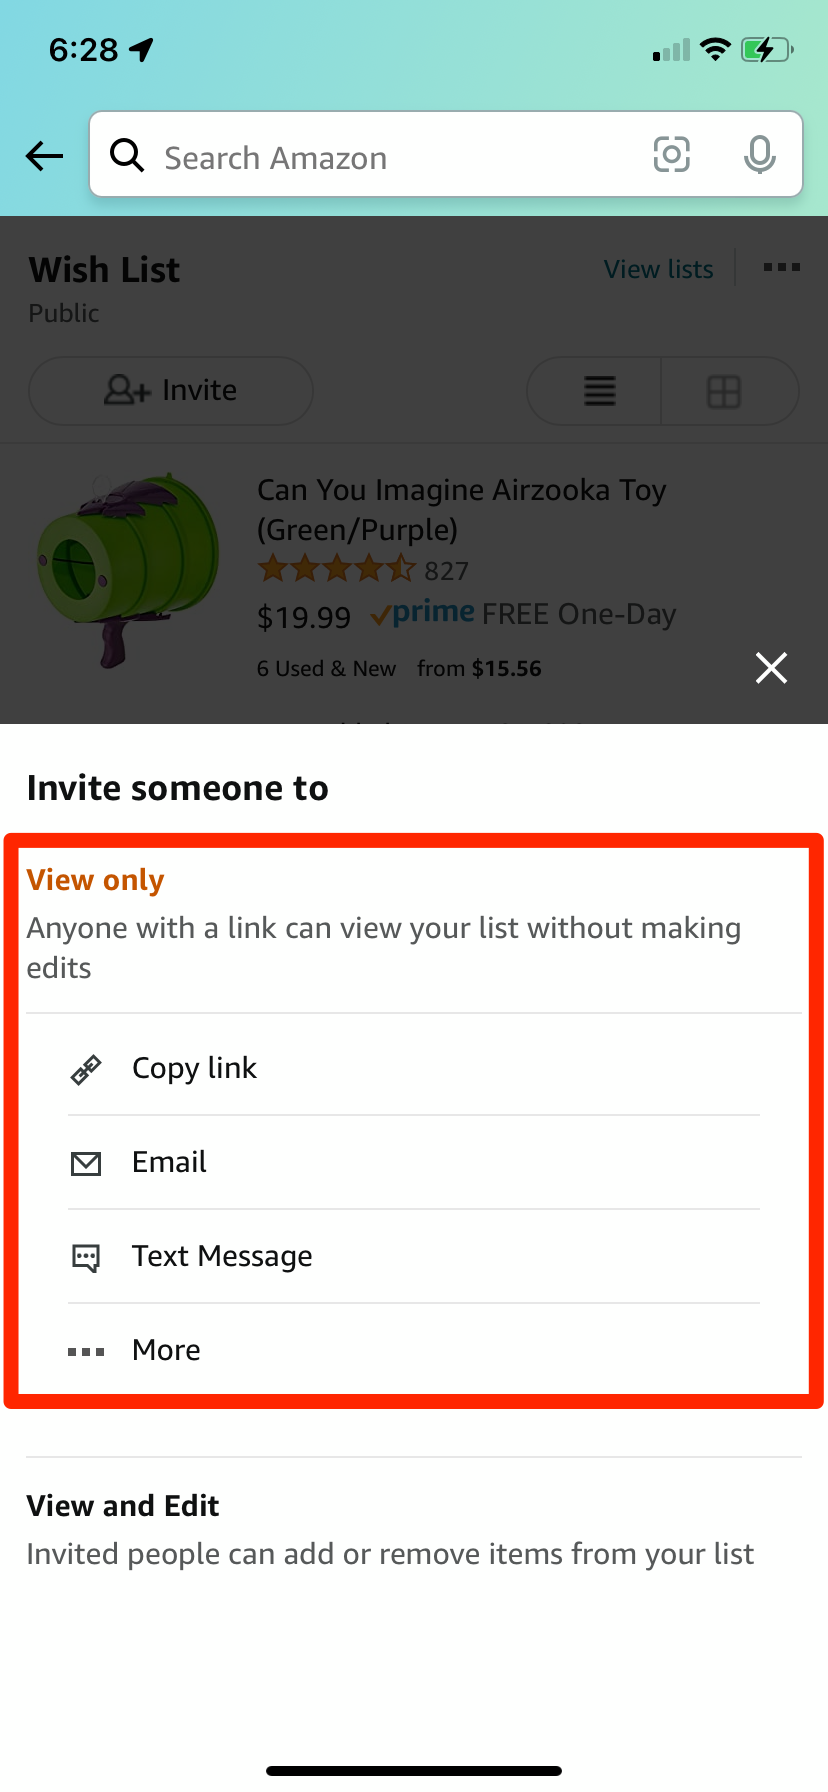 A variety of options for sharing your Amazon Wish List in the Amazon iPhone app.